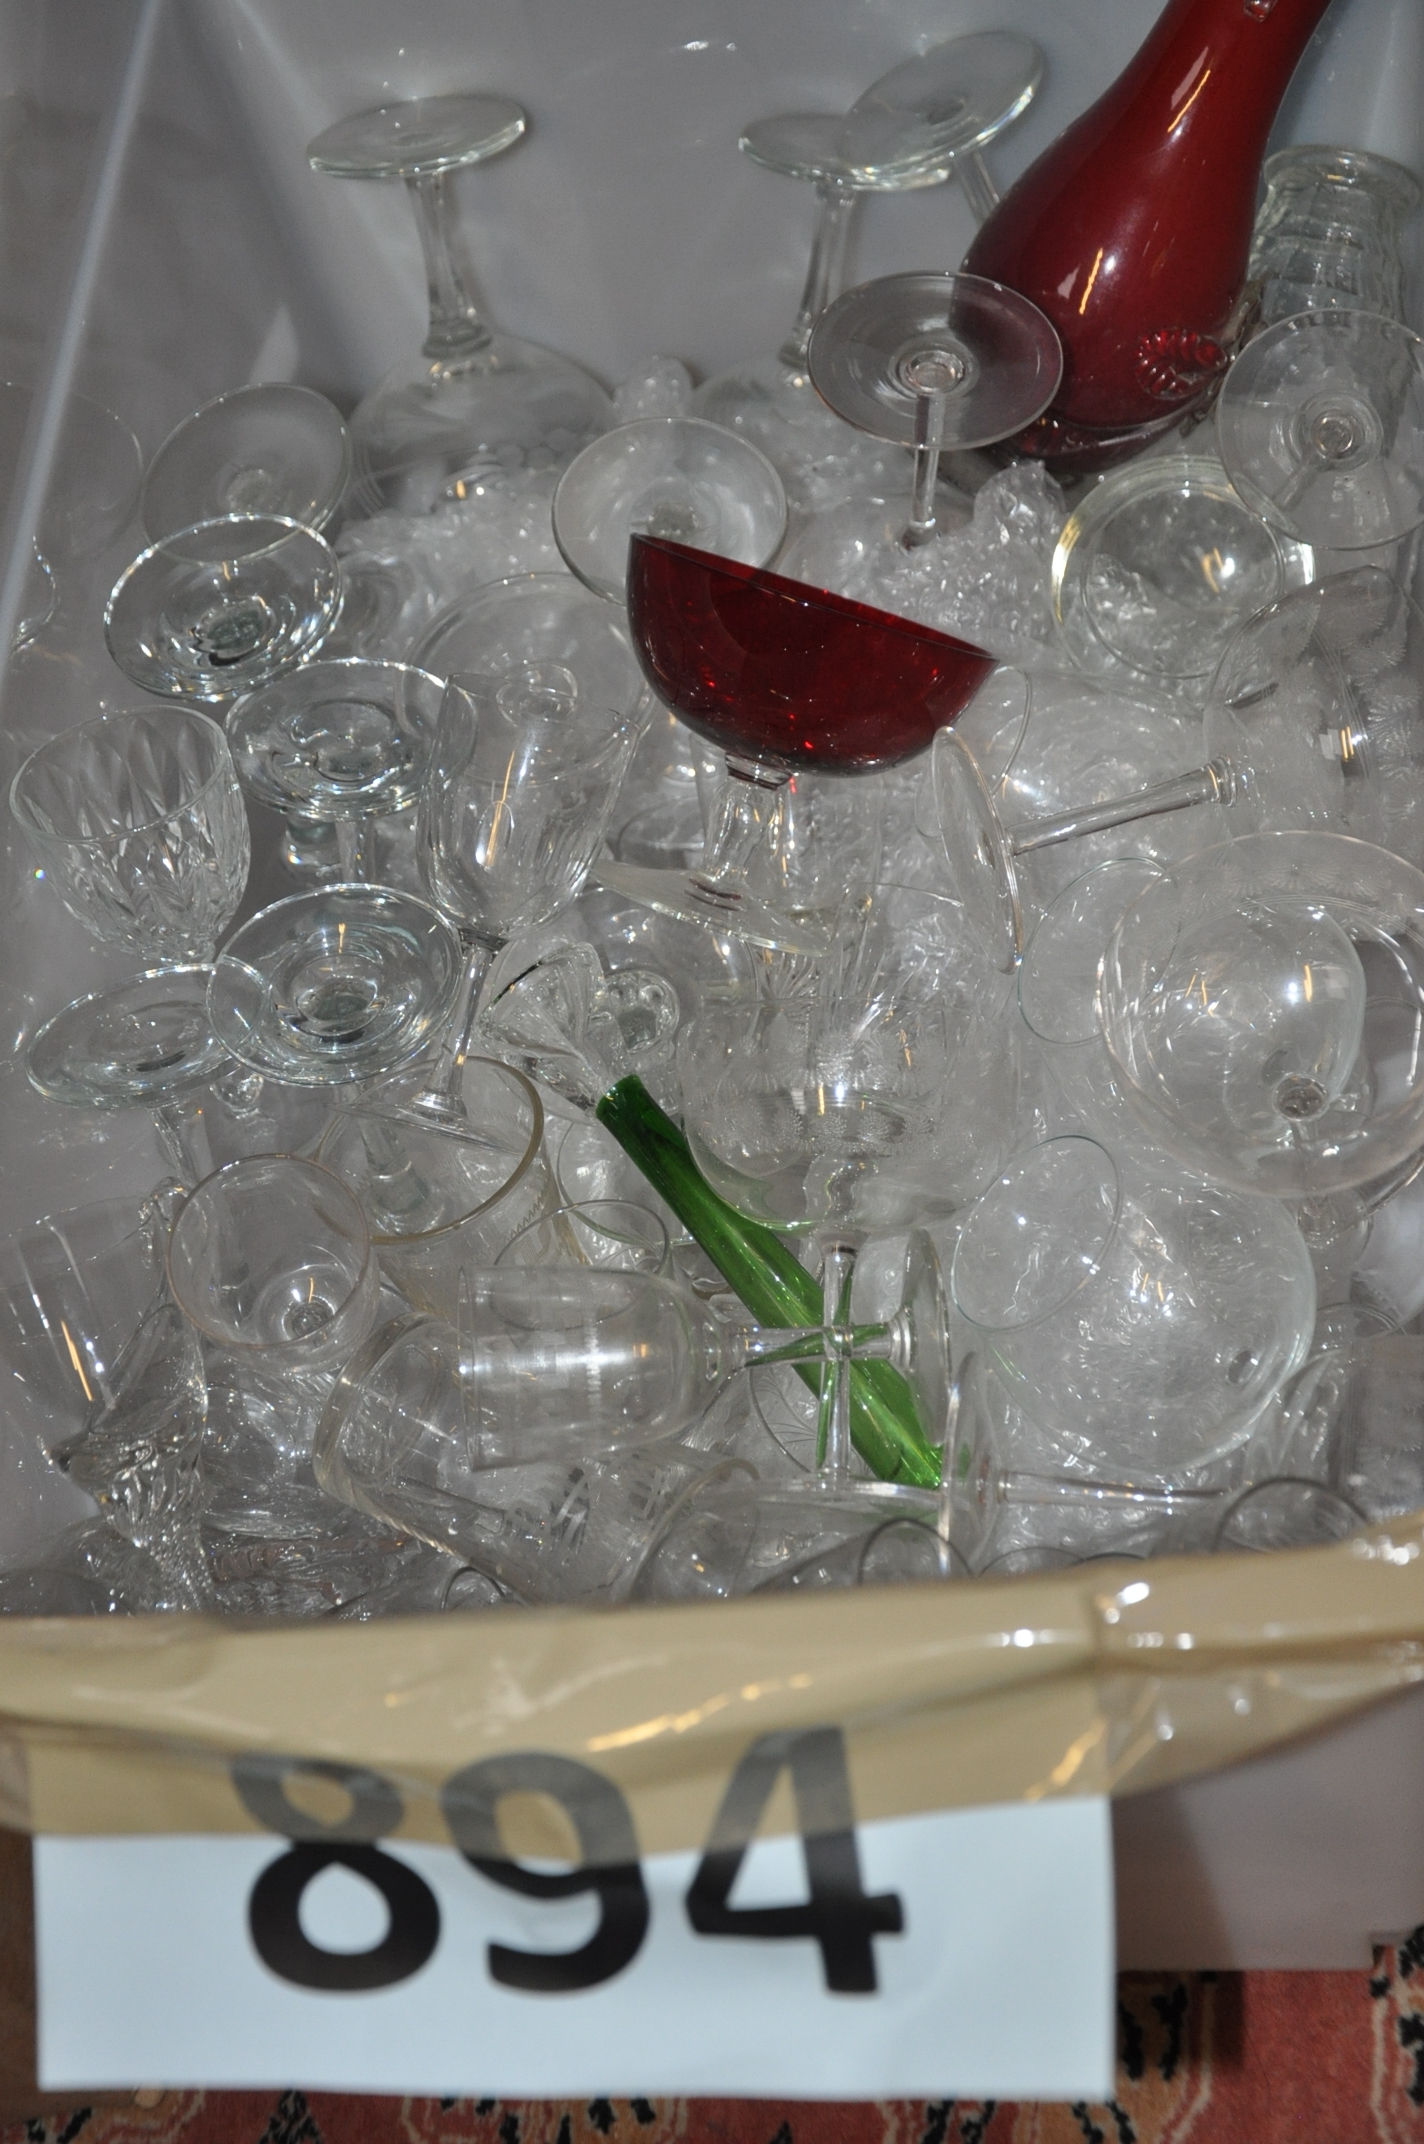 A box of glassware to include wine glasses, tumblers and other items.